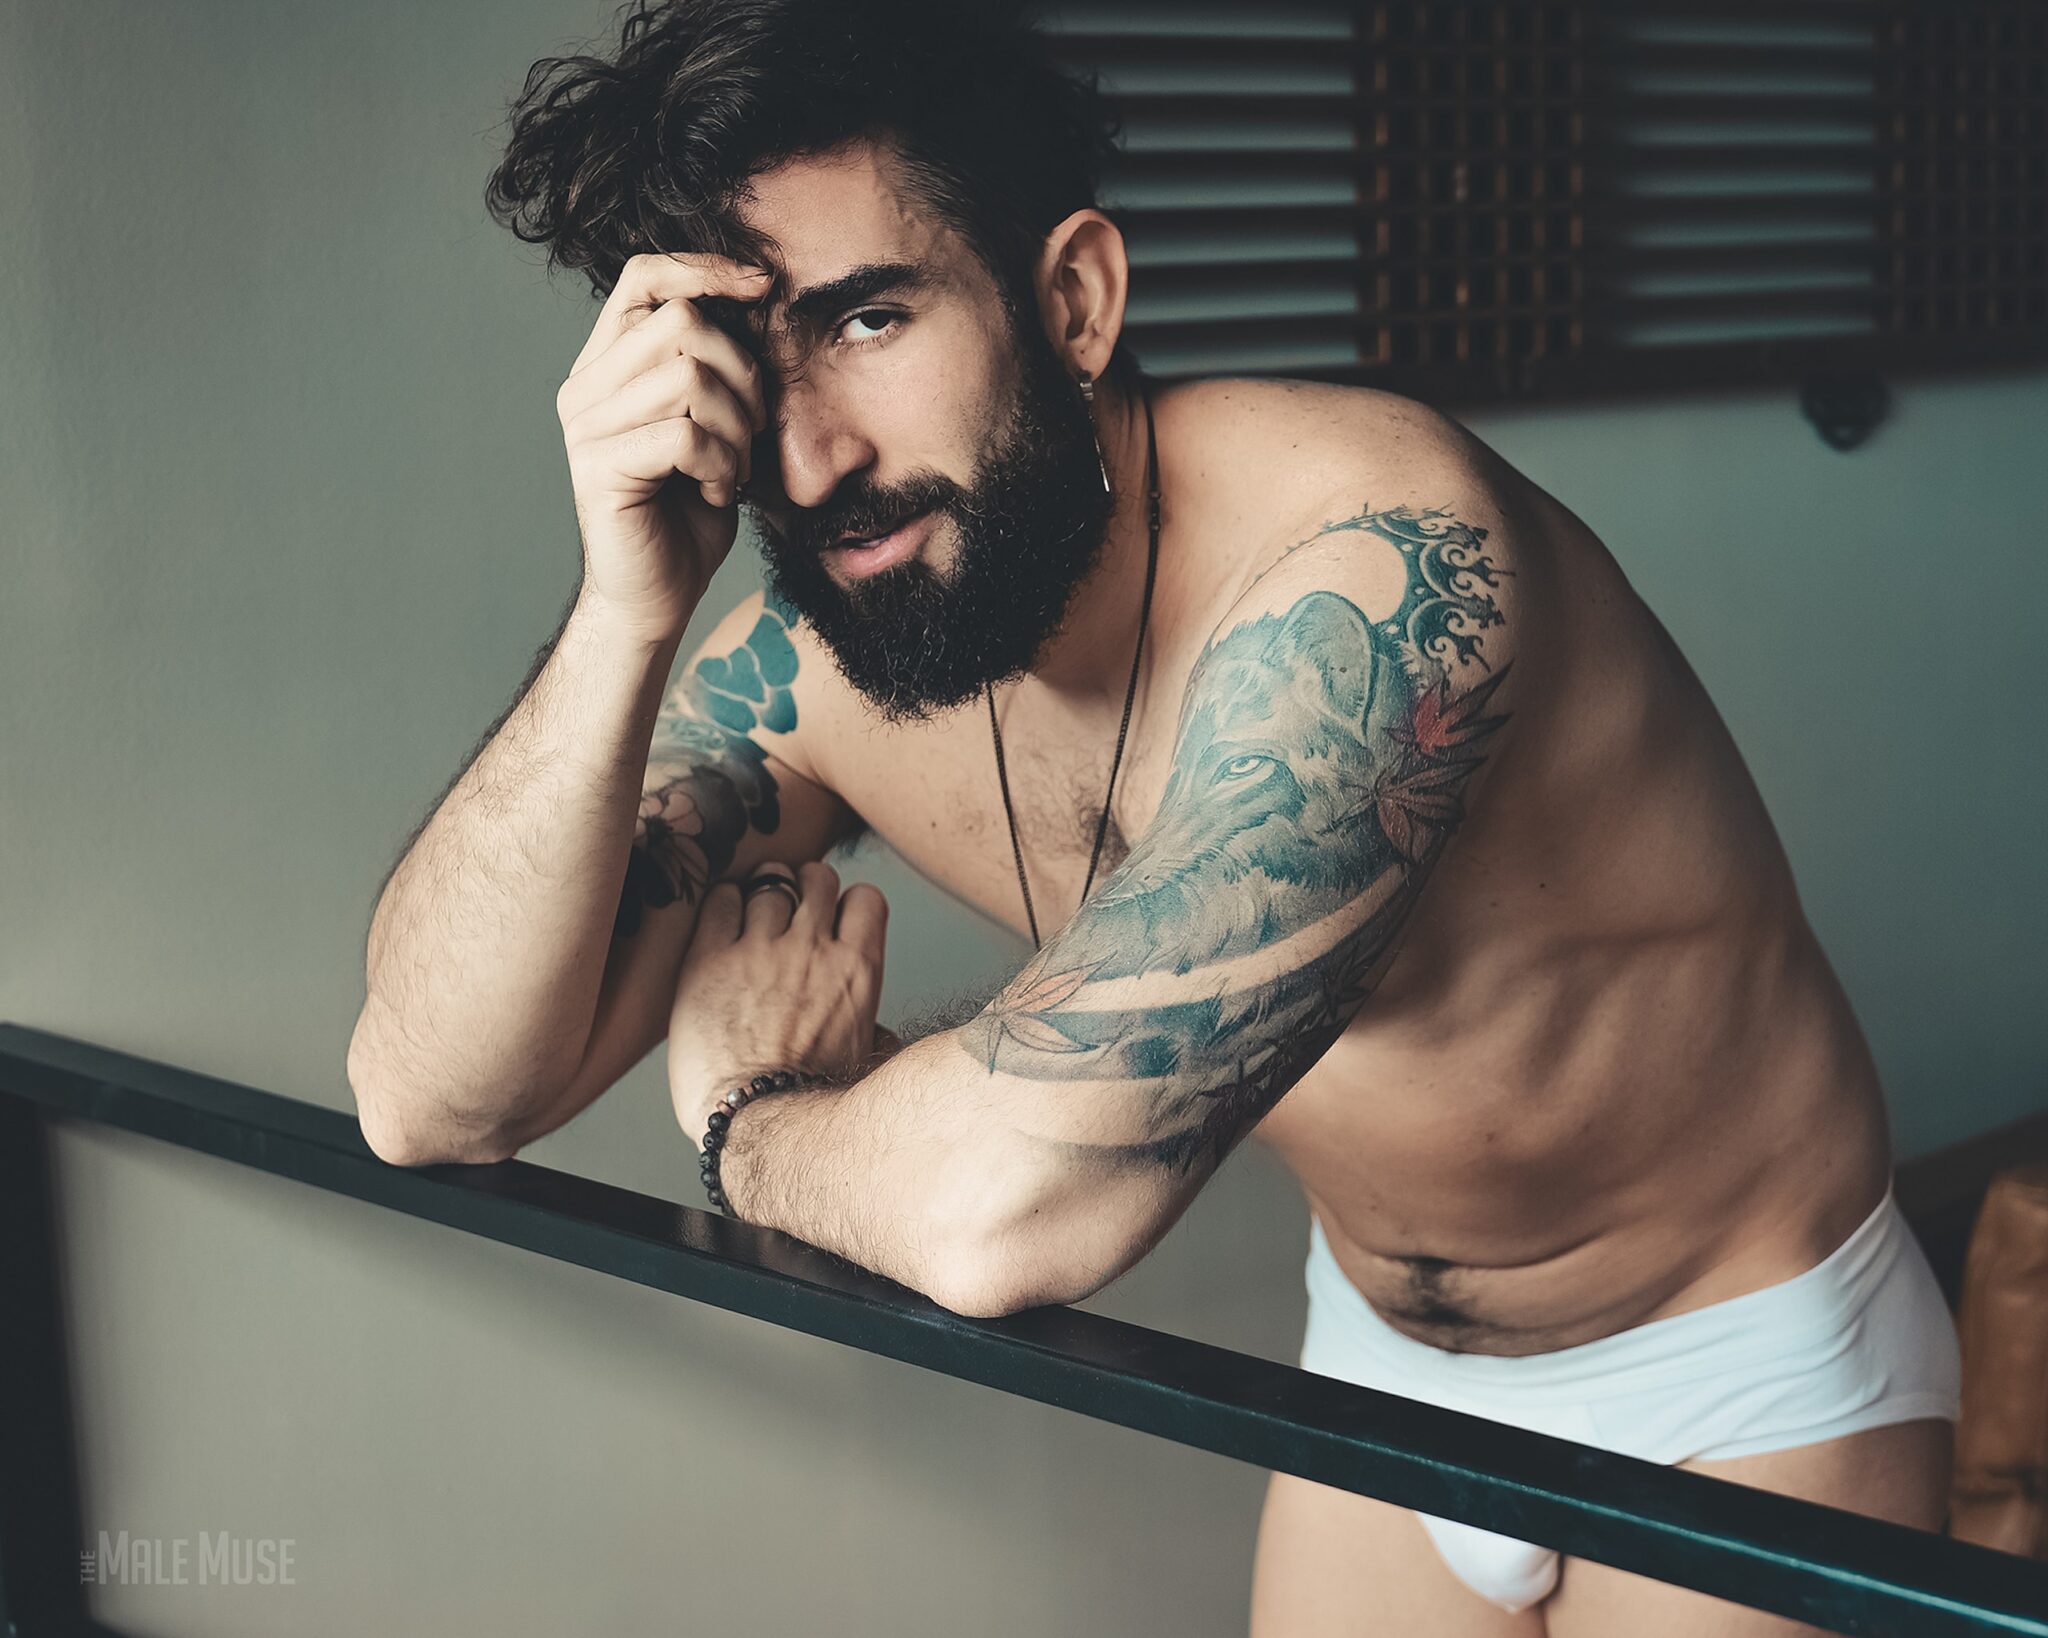 spanish hunk Oriol Lopez instagram:7kiba photographed by themalemuse manly